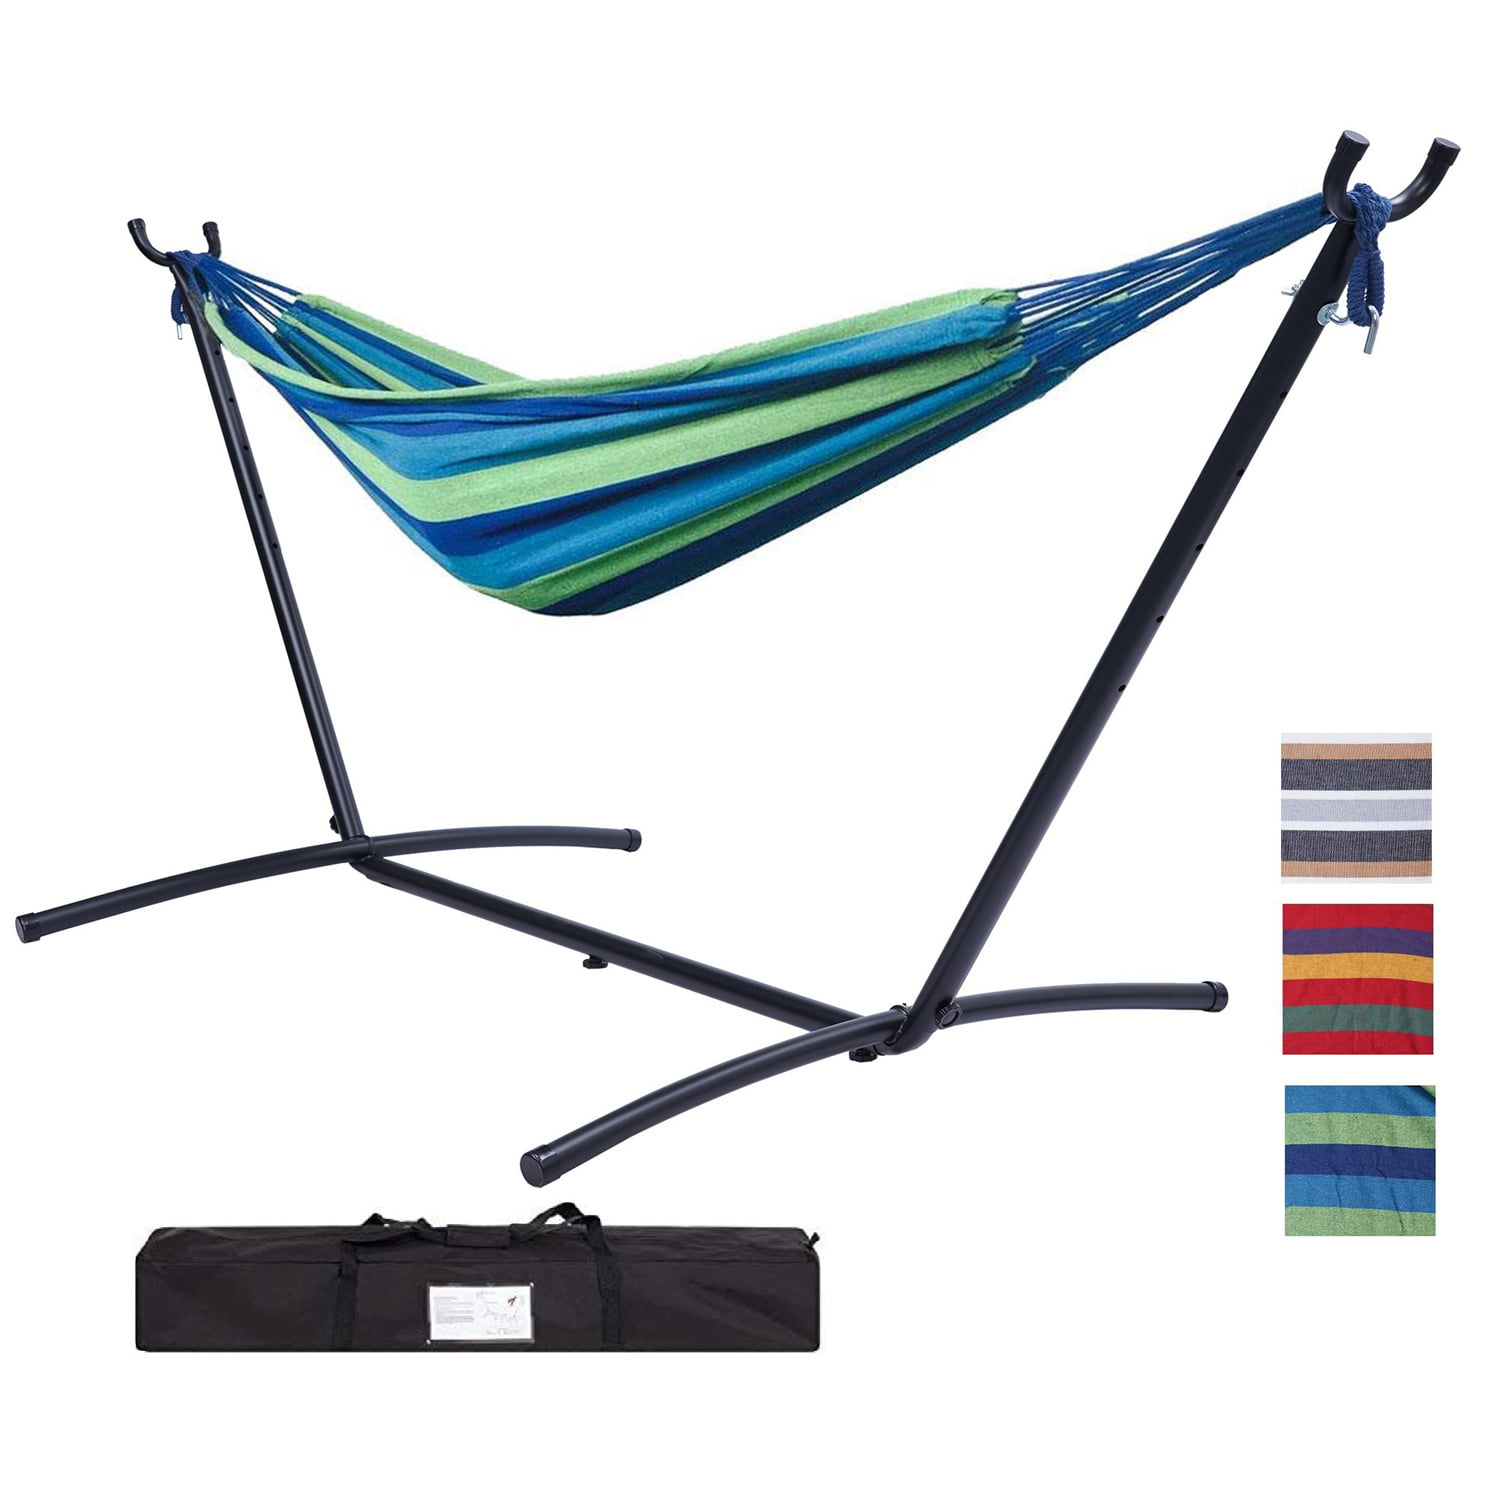 Details about   Multi-color 2-Person Double Hammock With Space Saving Steel Stand Backyard 